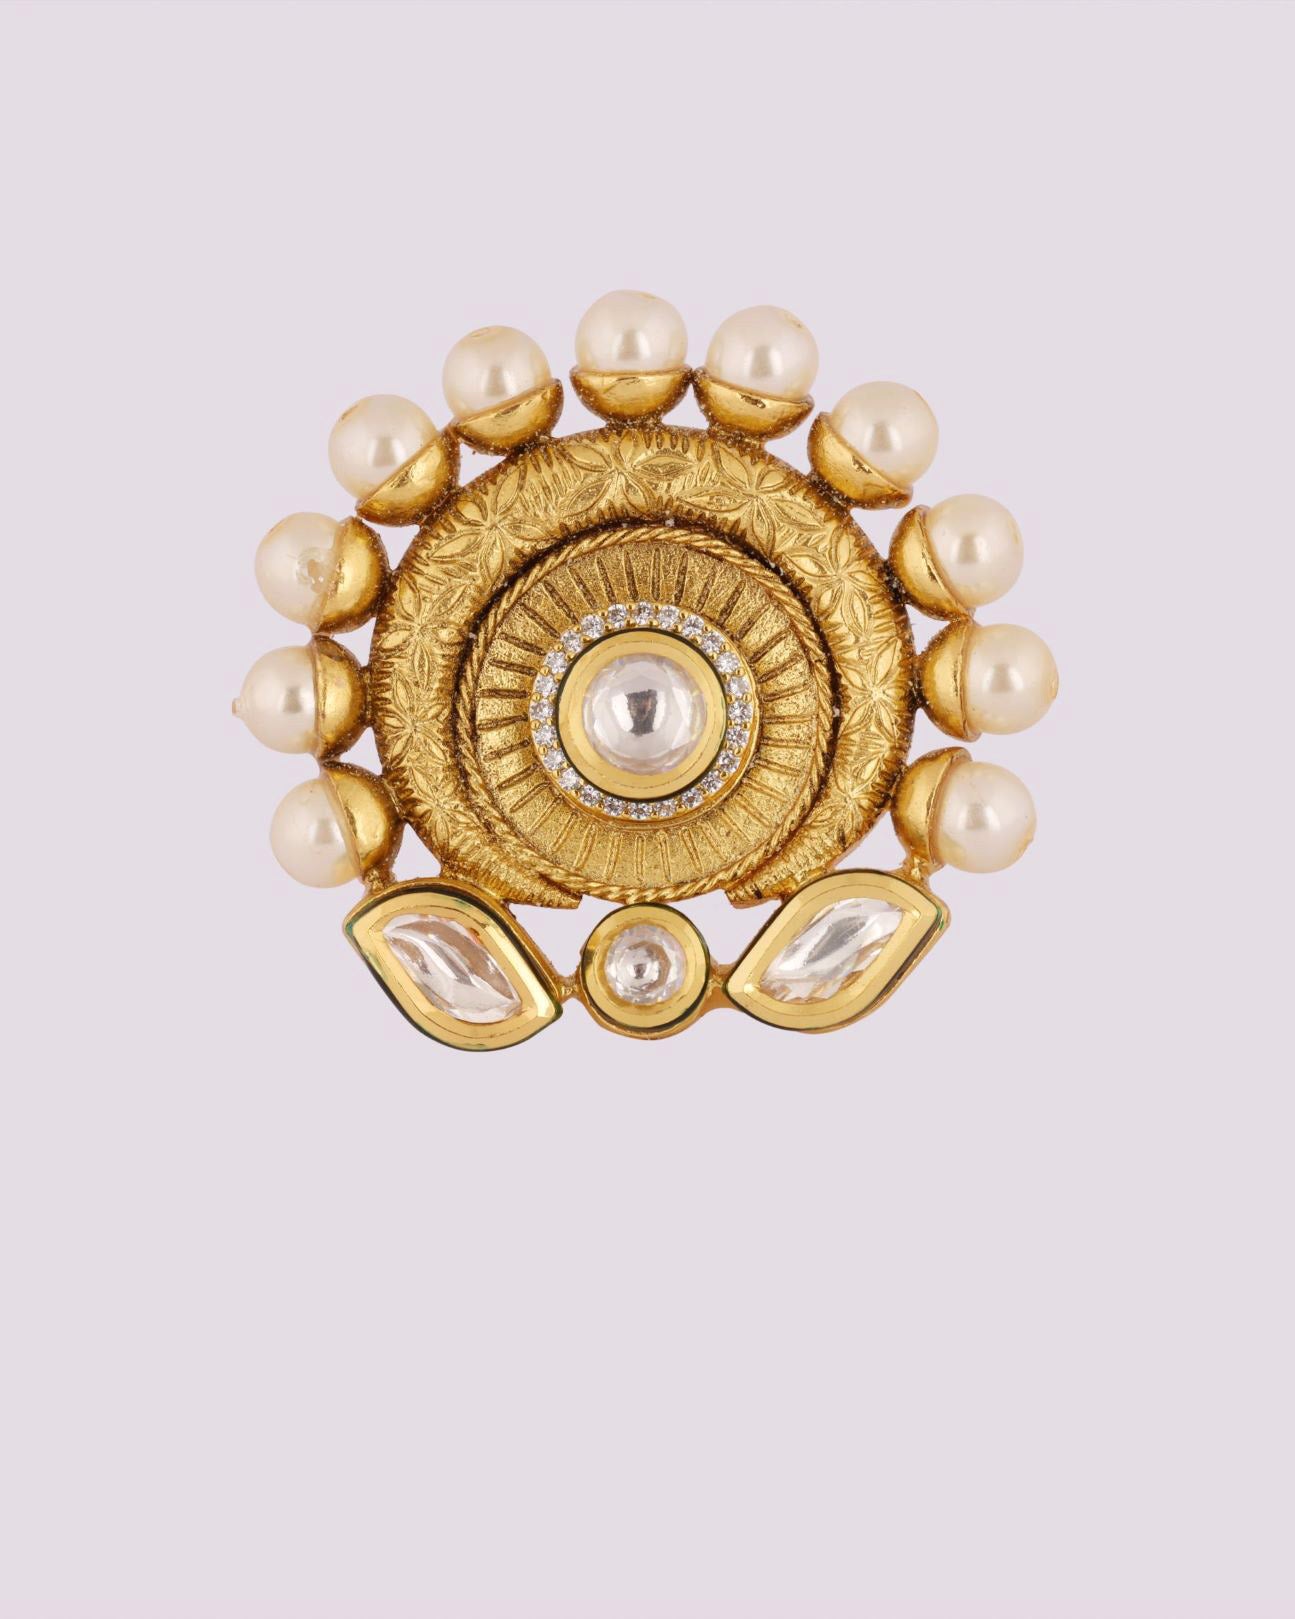 Kundan Ring | Gold ring designs, Gold necklace designs, Gold jewelry fashion